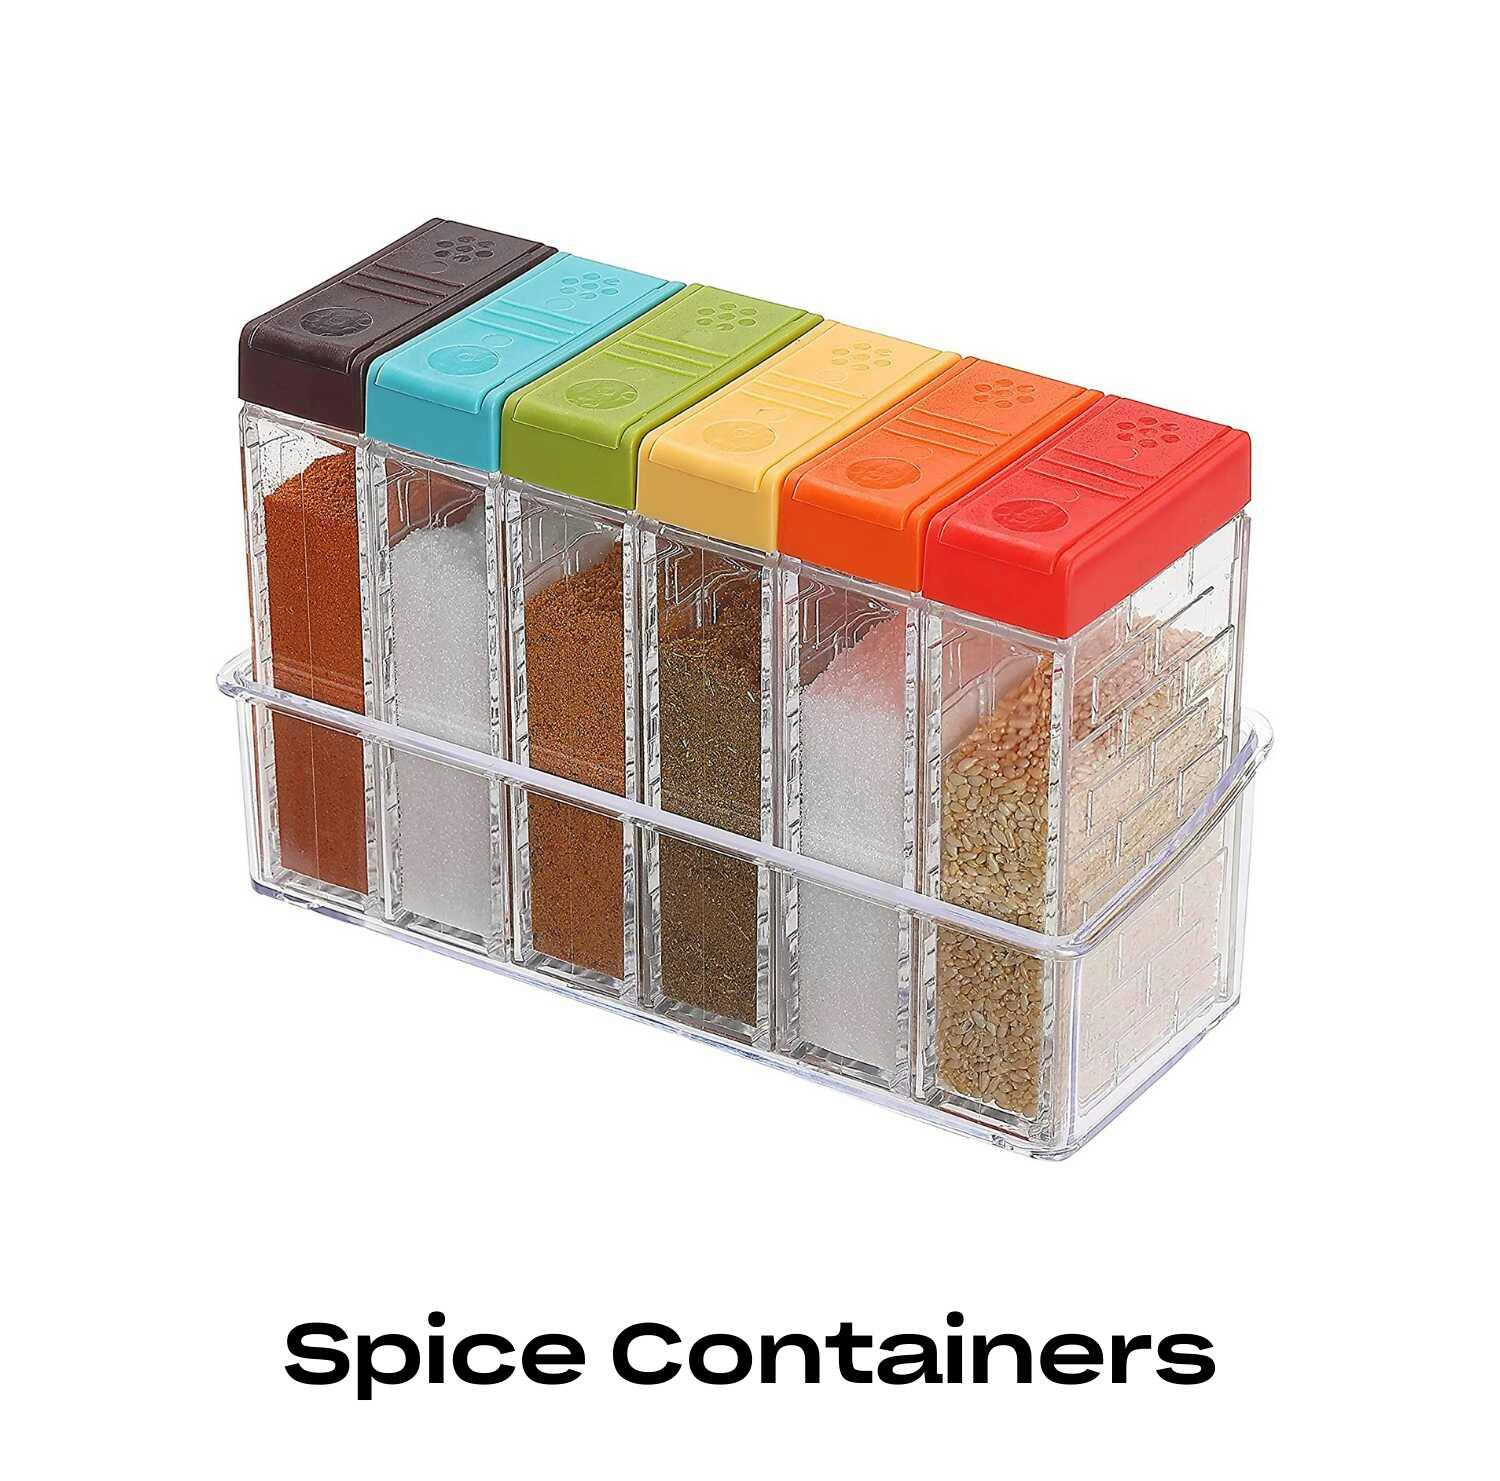 A stack of 6 spice containers with various colored lids.